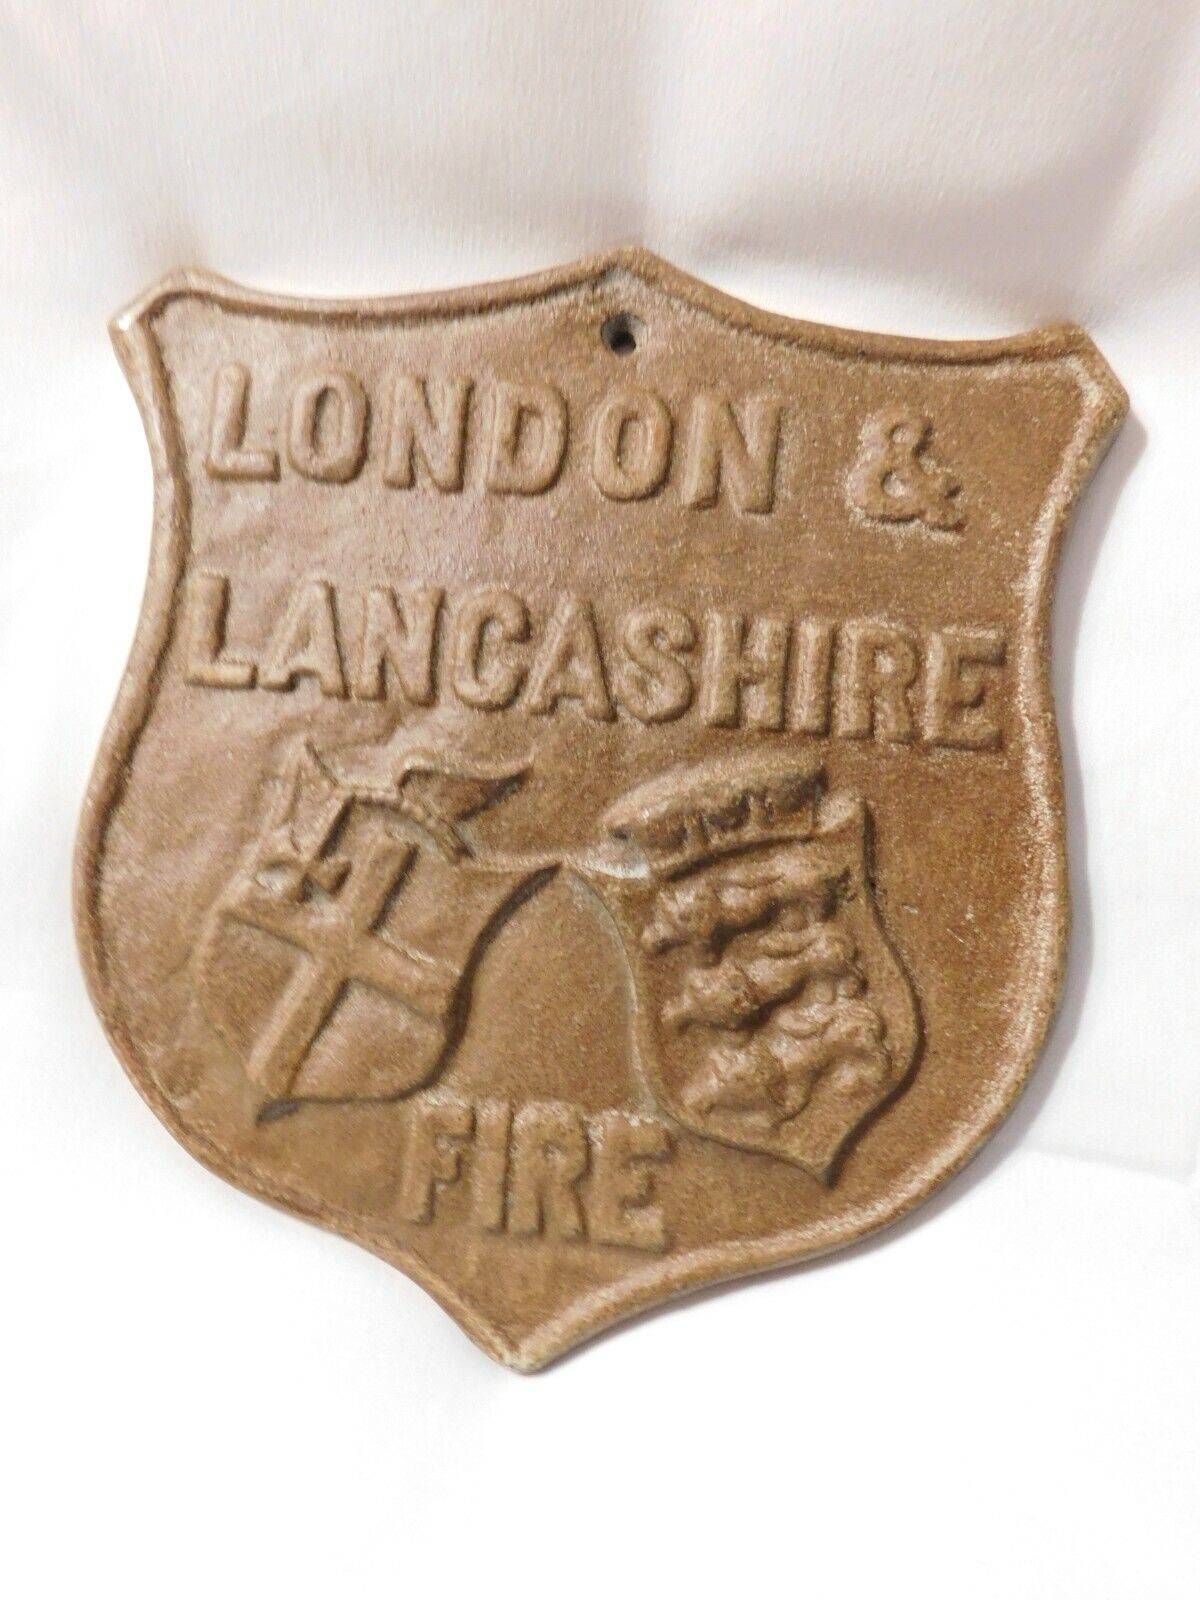 London and Lancashire Fire Sign England Plaque 